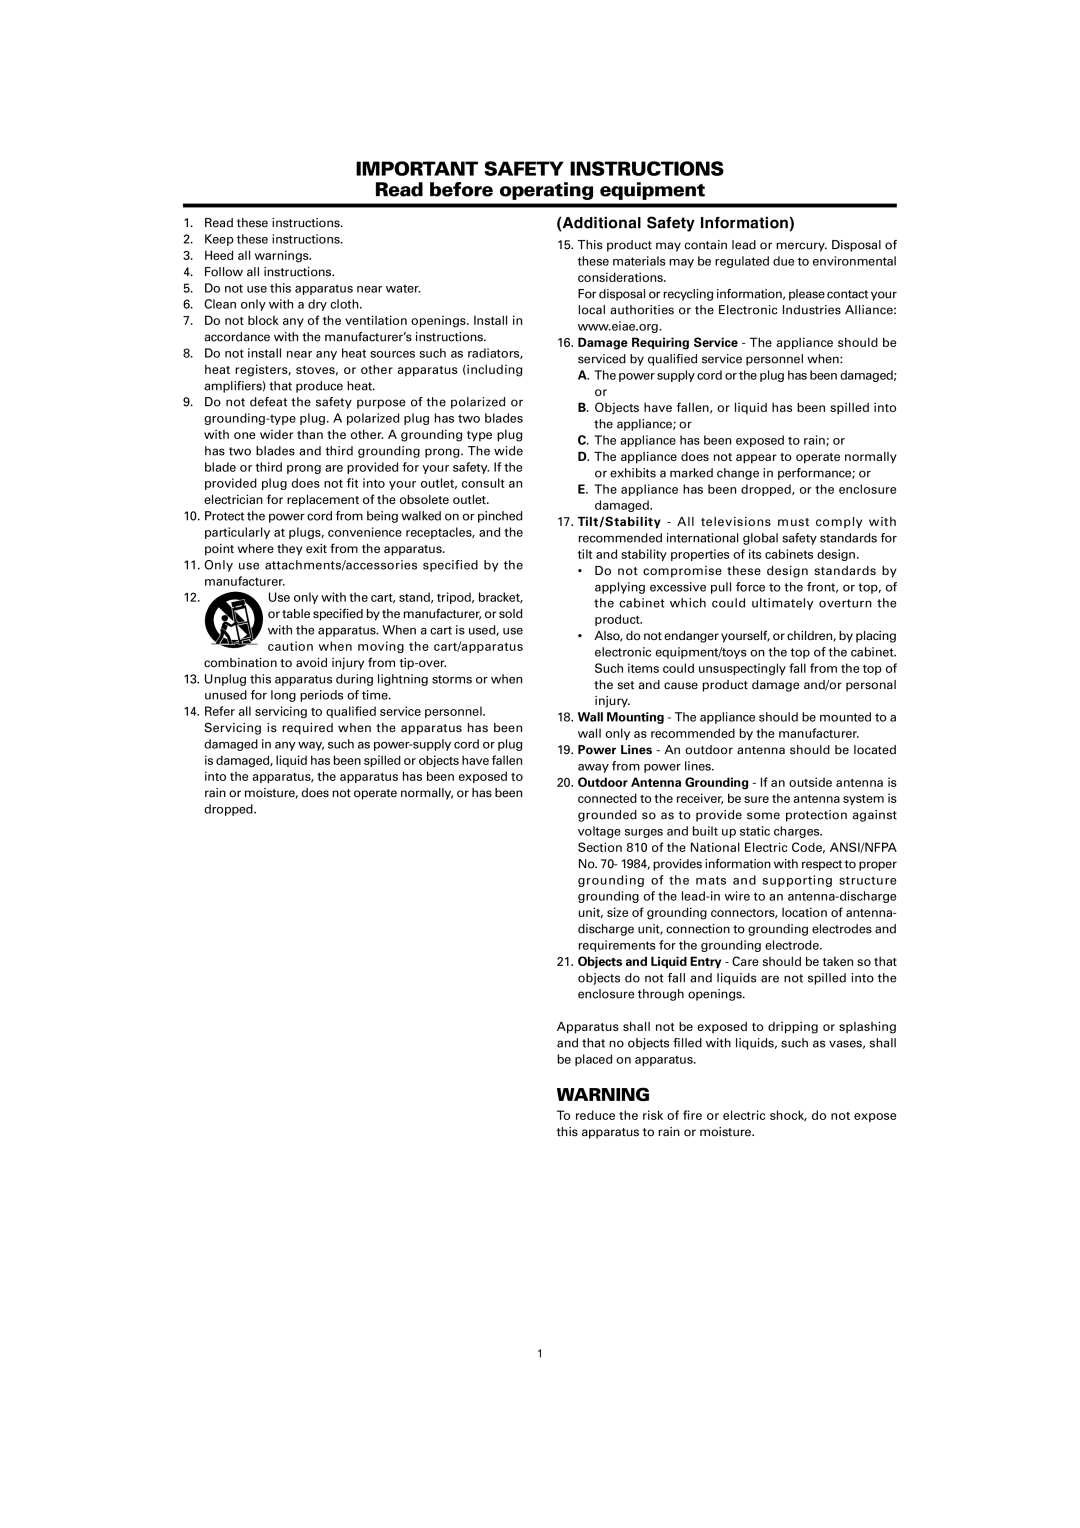 Marantz PD5001 manual IMPORTANT SAFETY INSTRUCTIONS Read before operating equipment, Additional Safety Information 